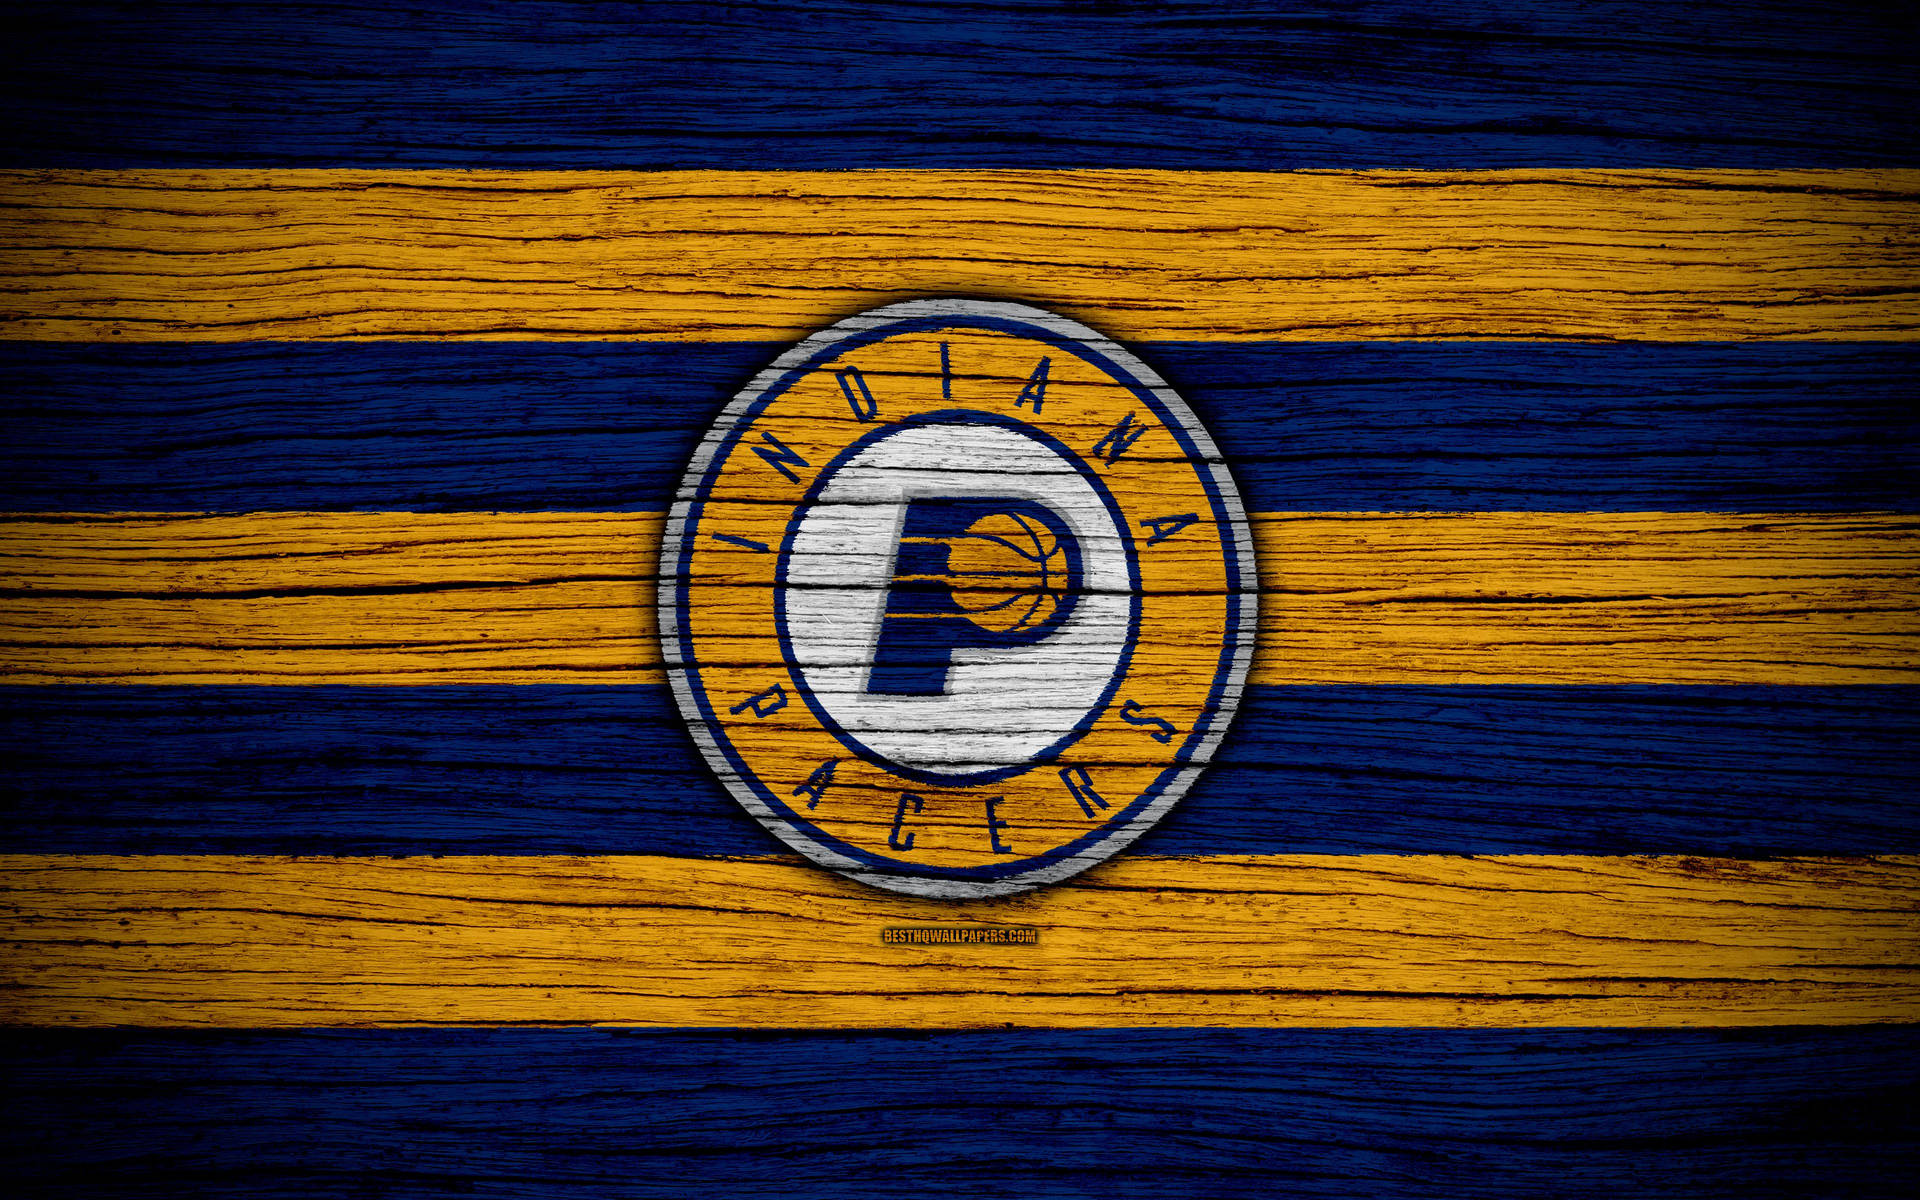 Indiana Pacers Wood Team Logo Wallpaper